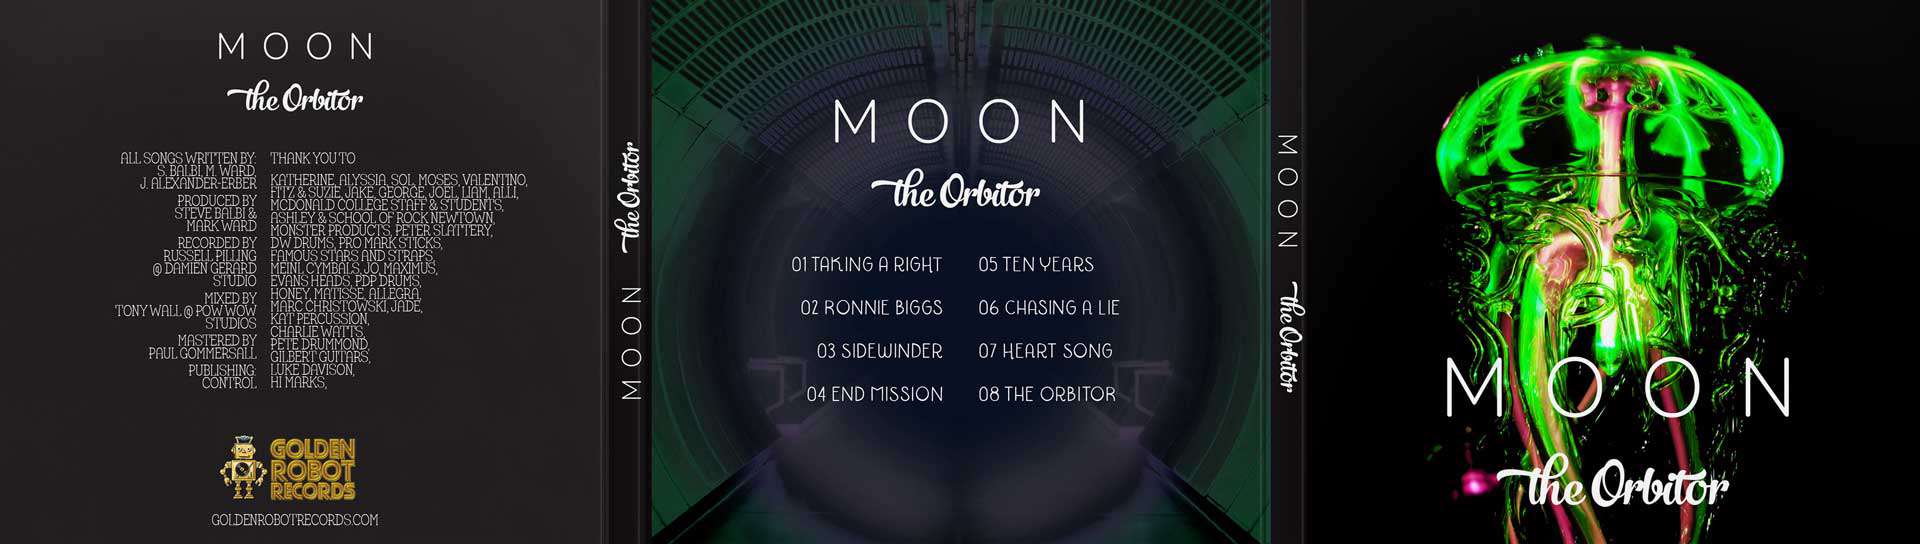 Moon The Orbitor outside CD cover by Moon the band, album art by Foxie Web Design located in Central Coast NSW